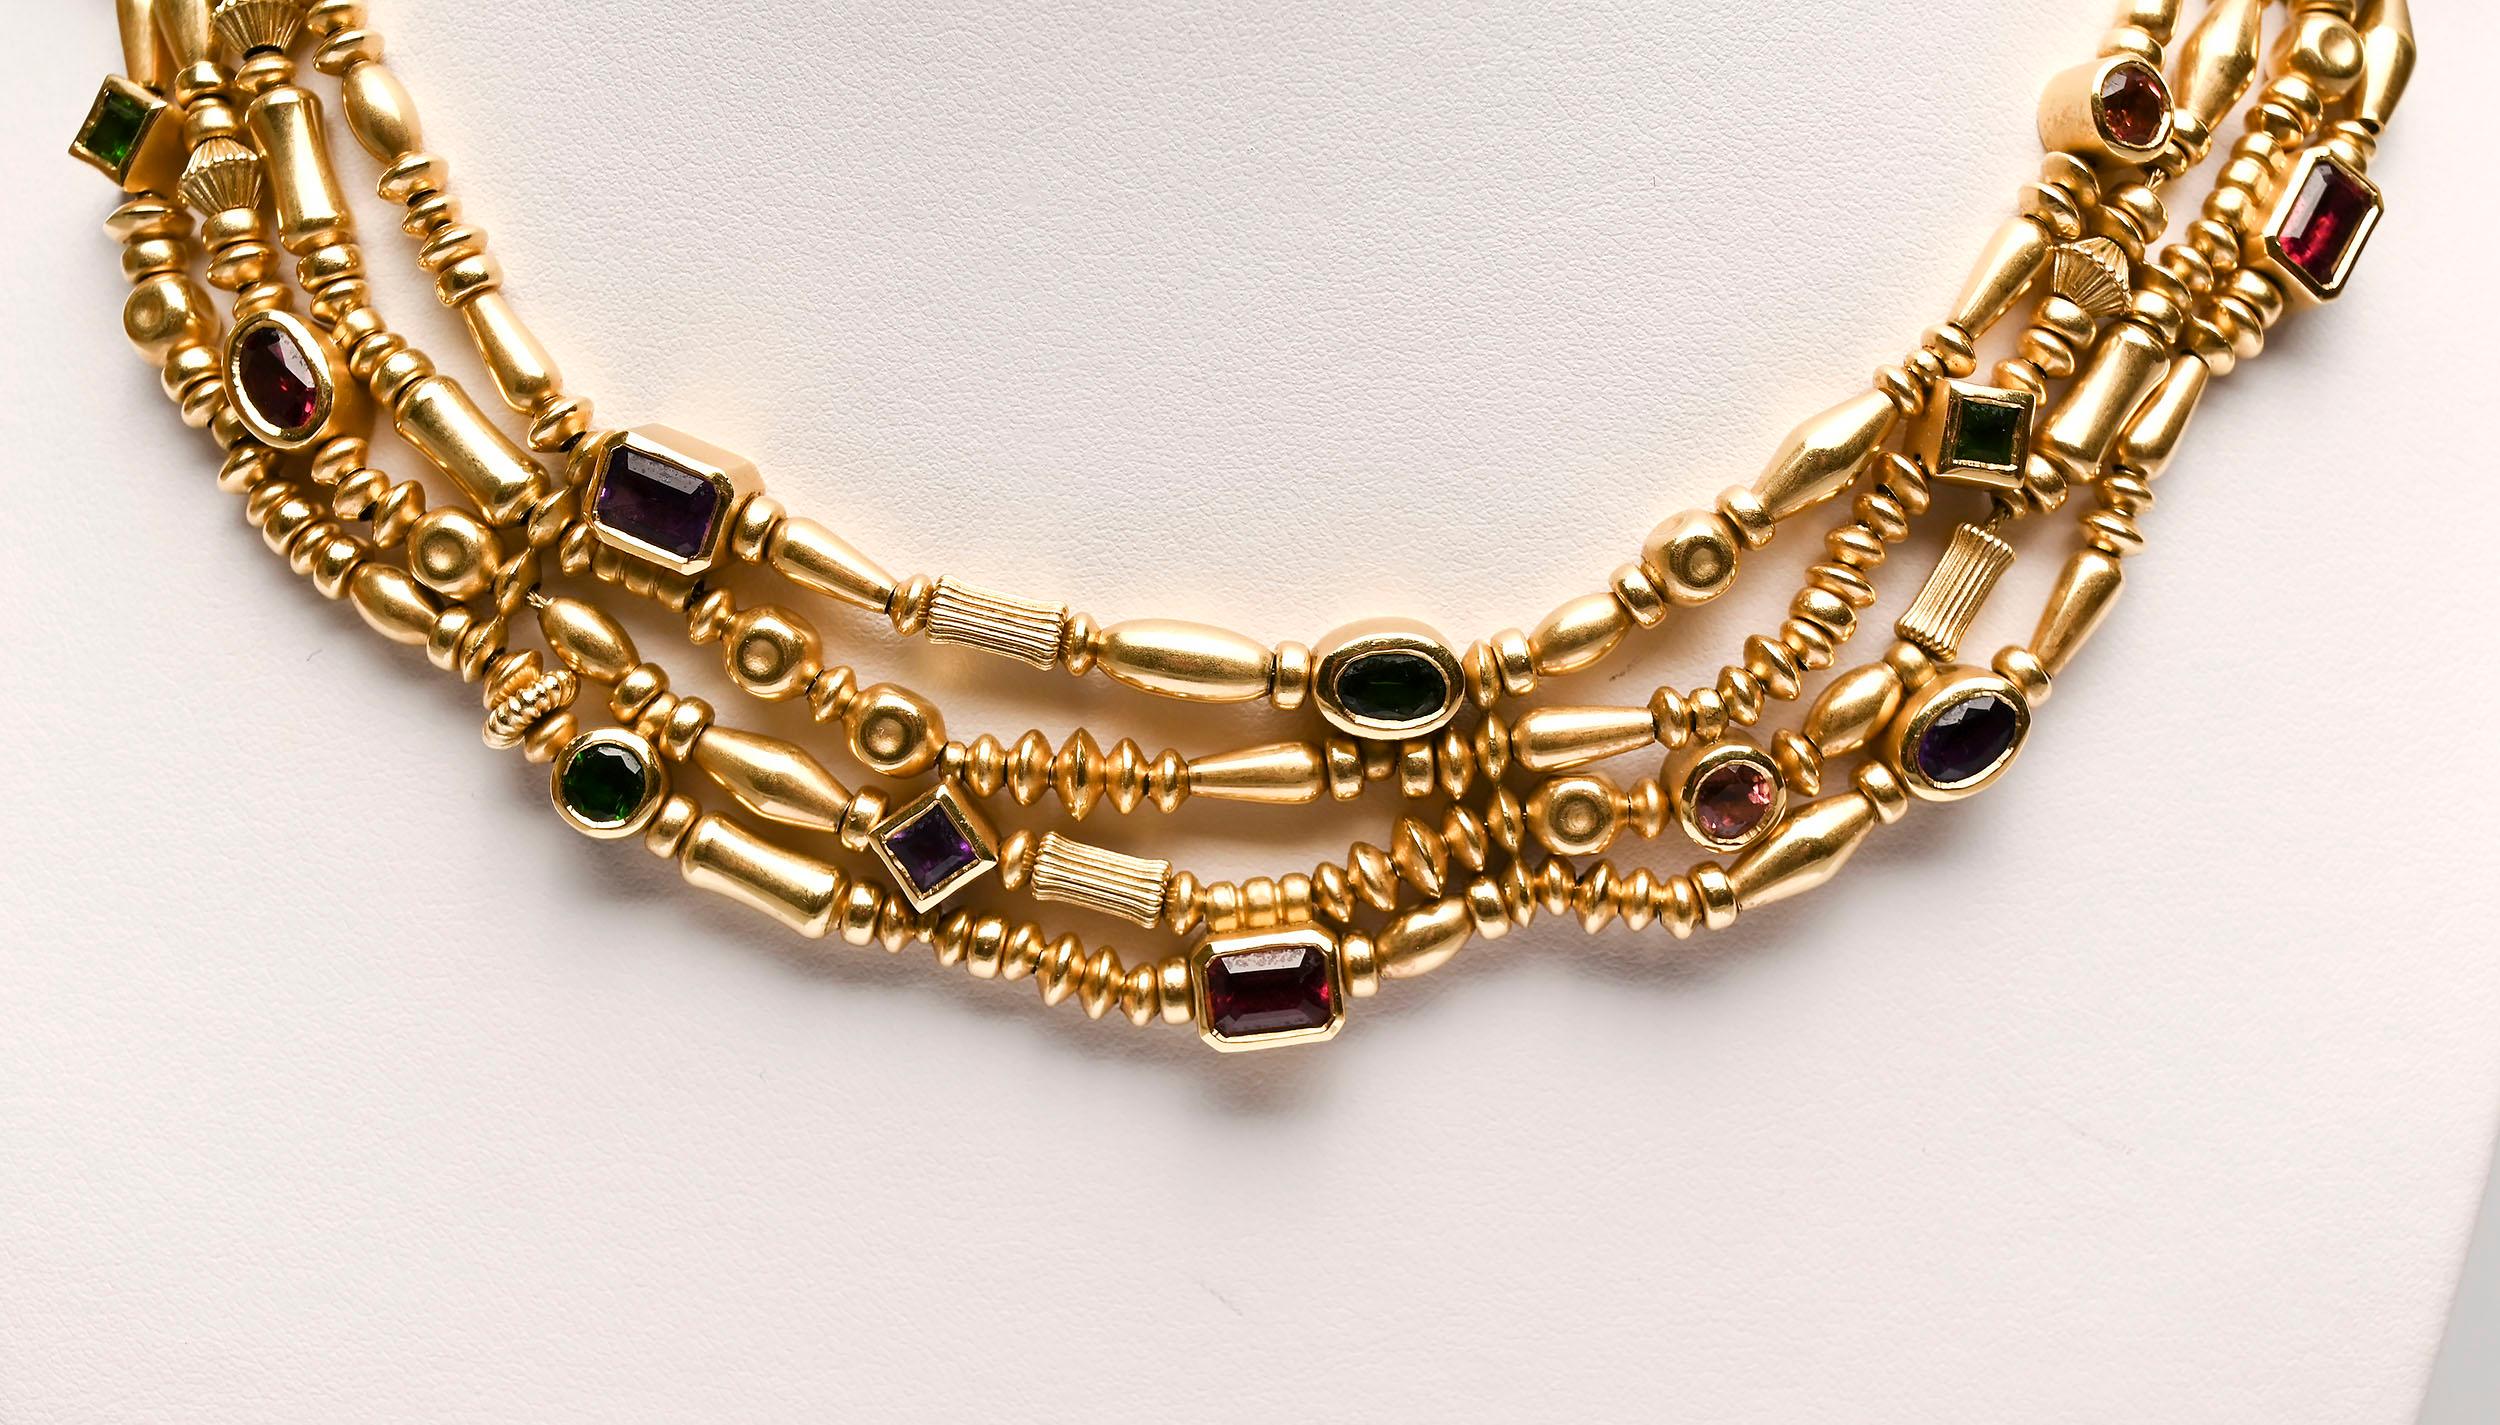 Mixed Cut Seidengang Multistrand Gold Necklace with Gemstones